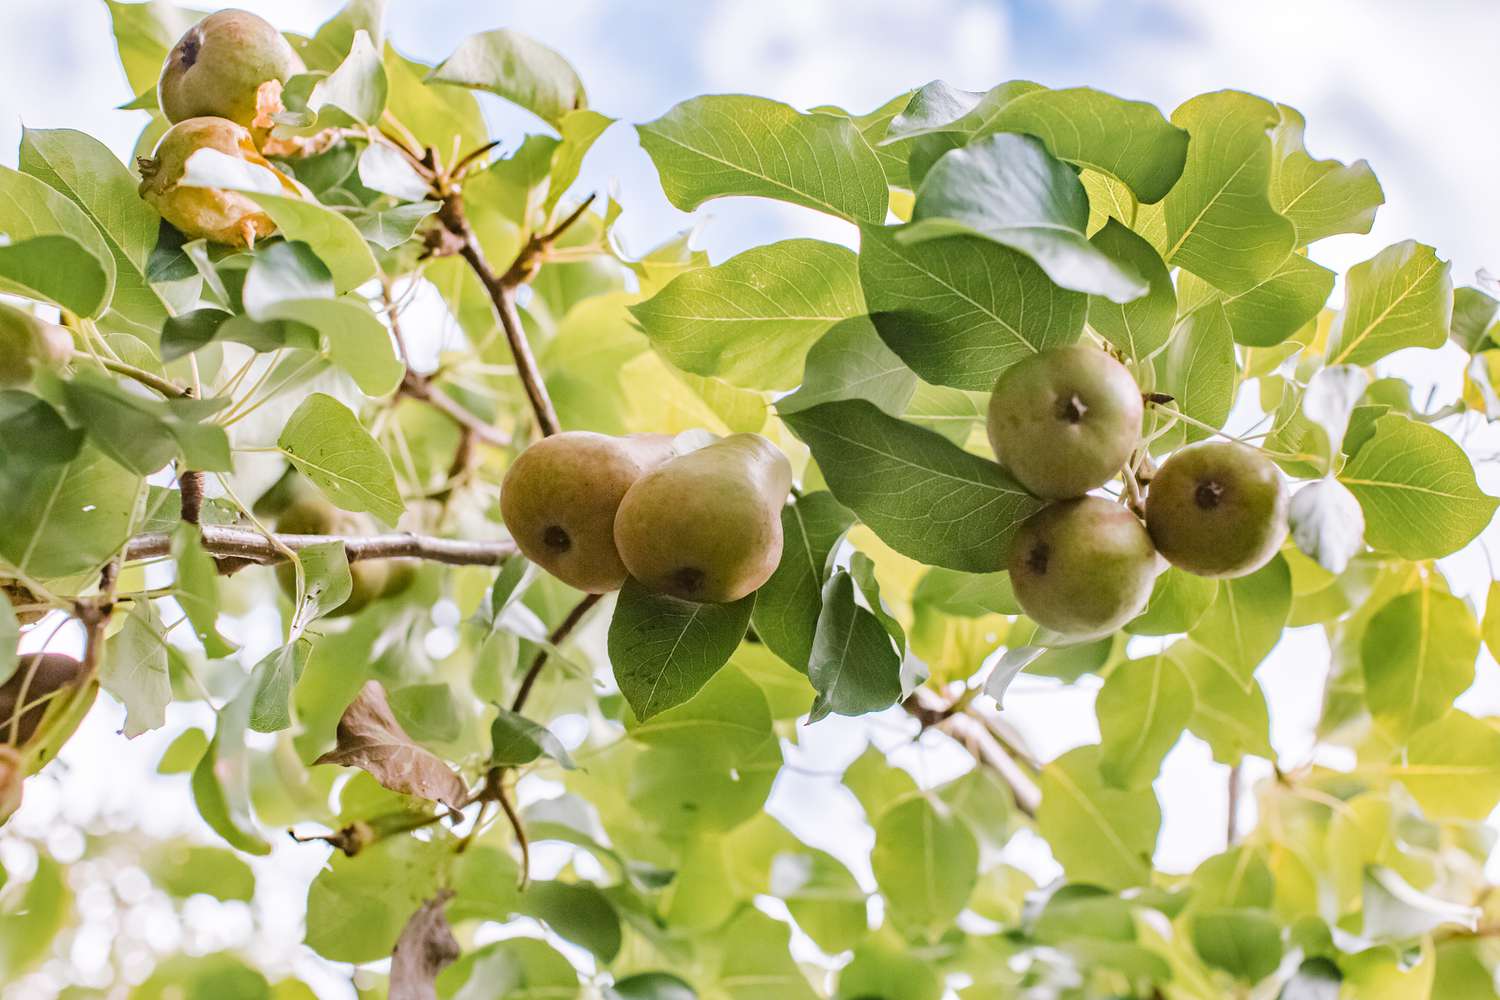 What Are The Benefits Of Pear?